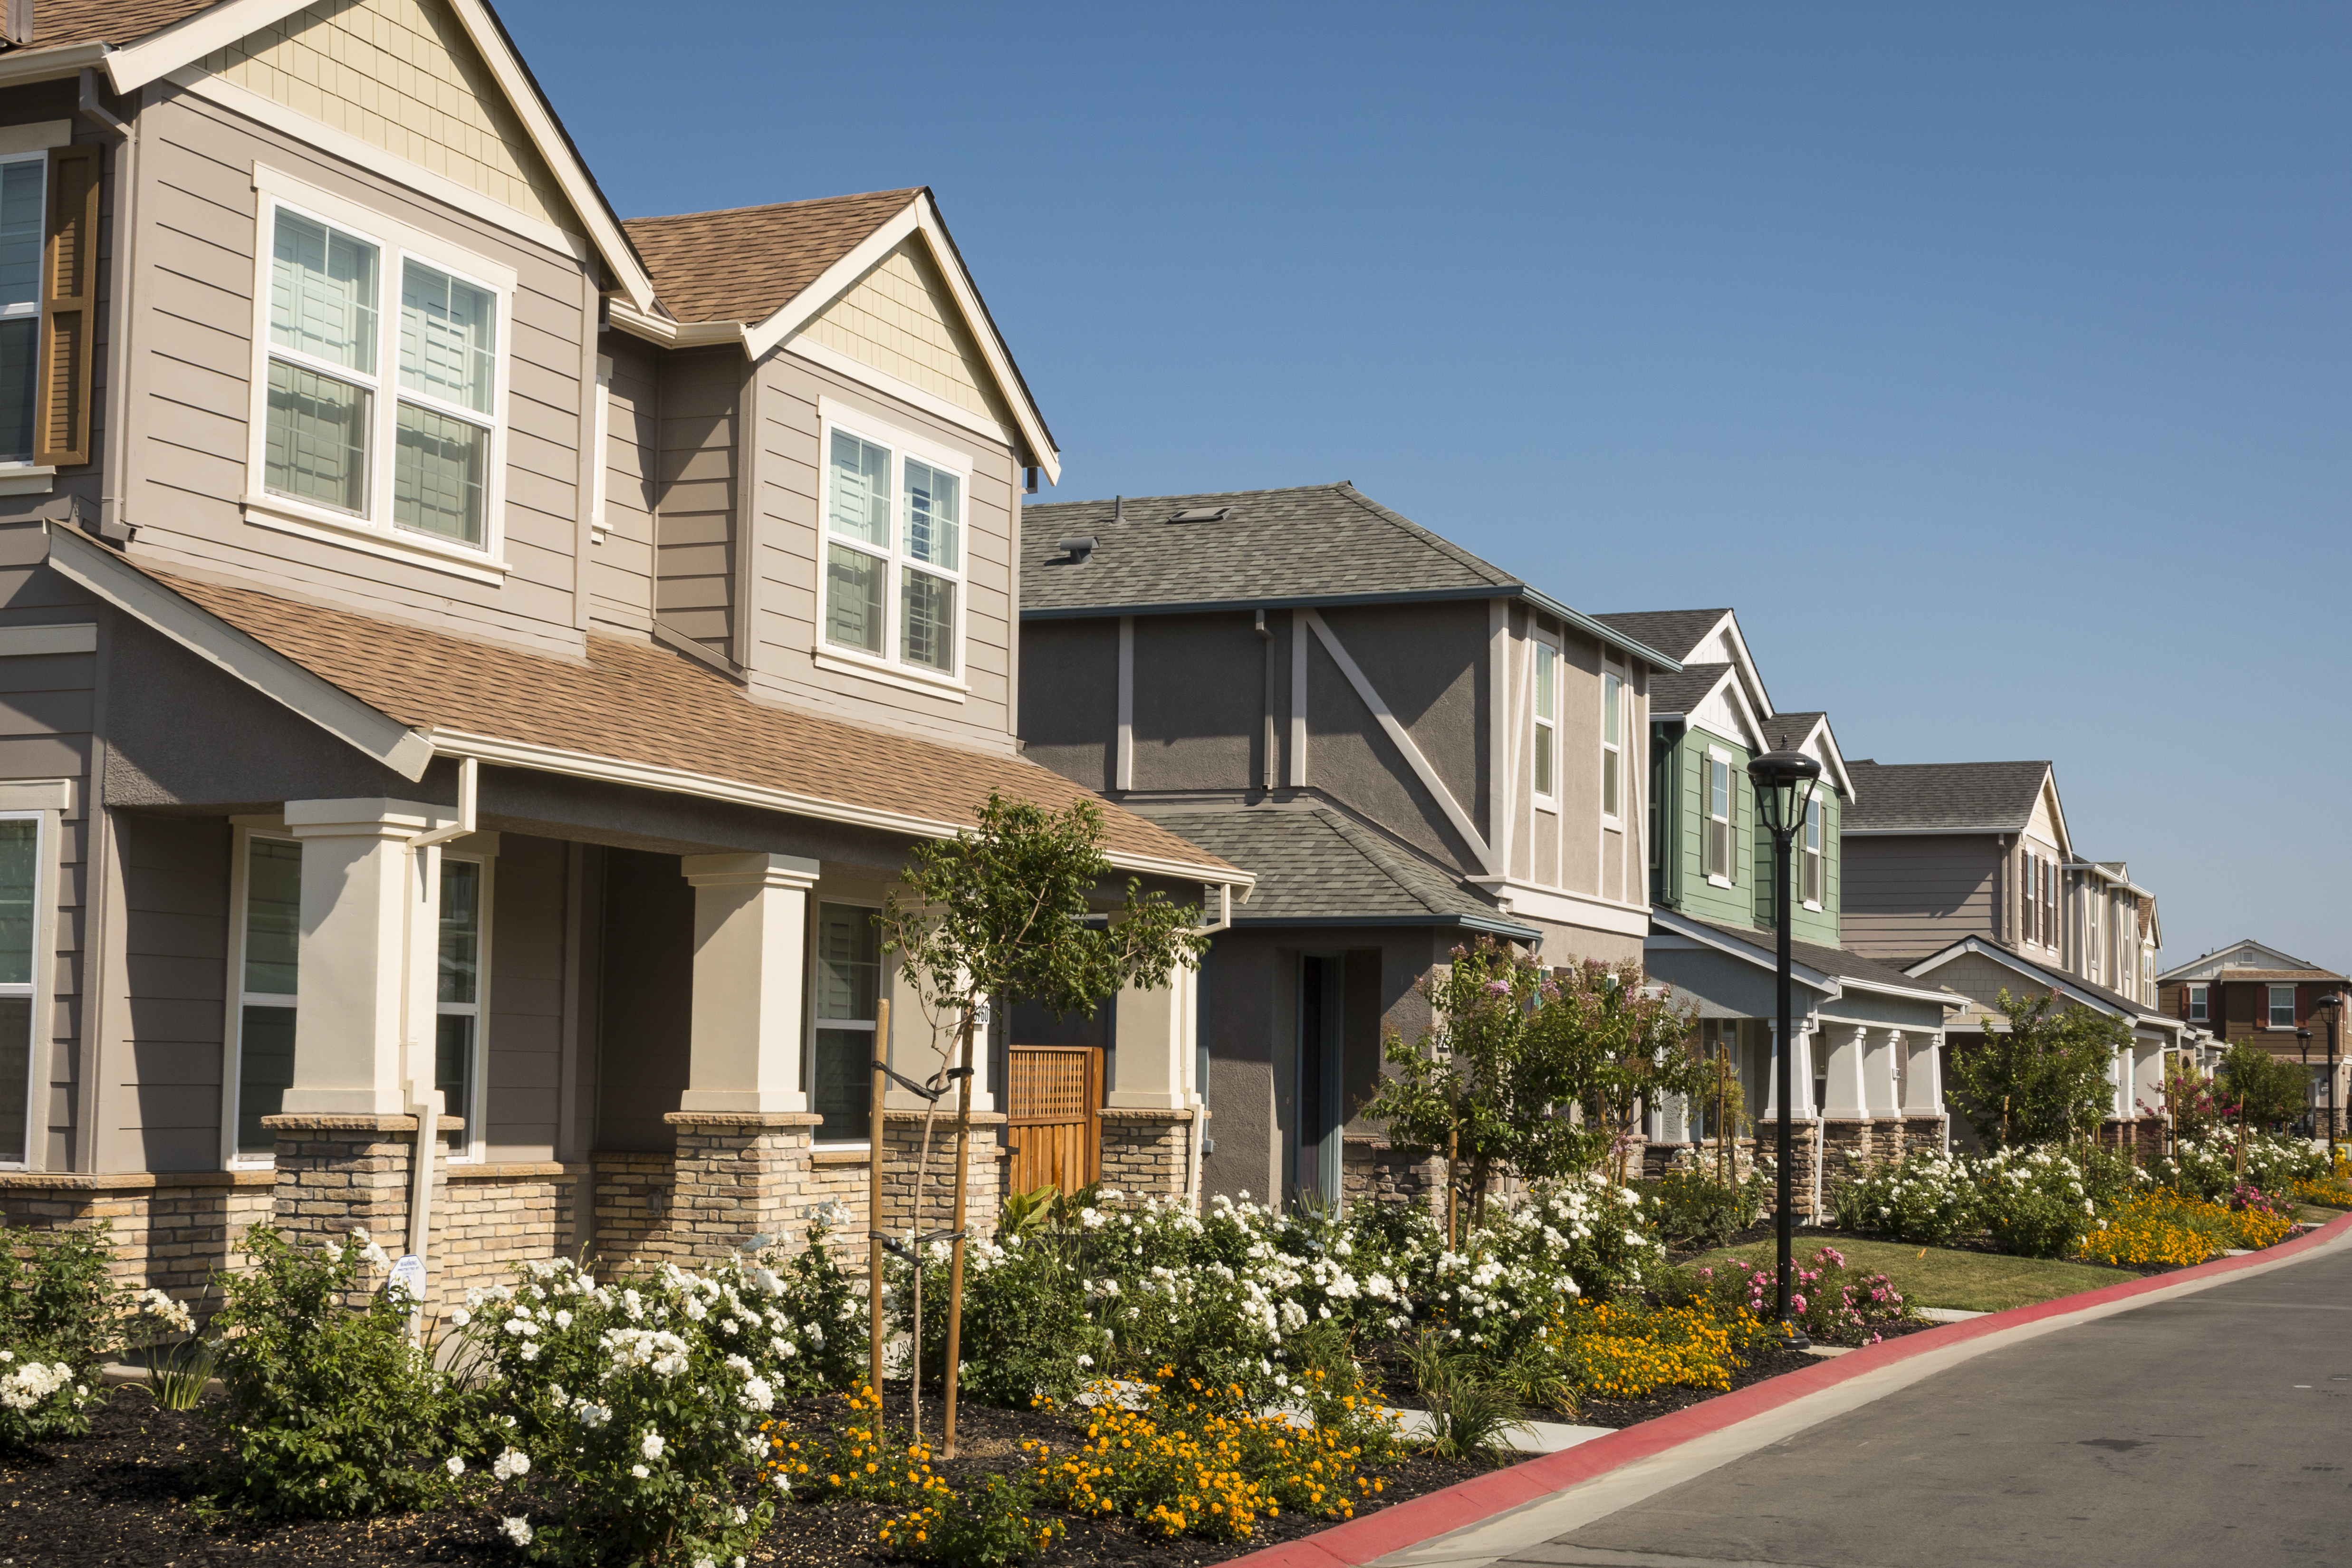 A row of newly-built houses in a residential subdivision.